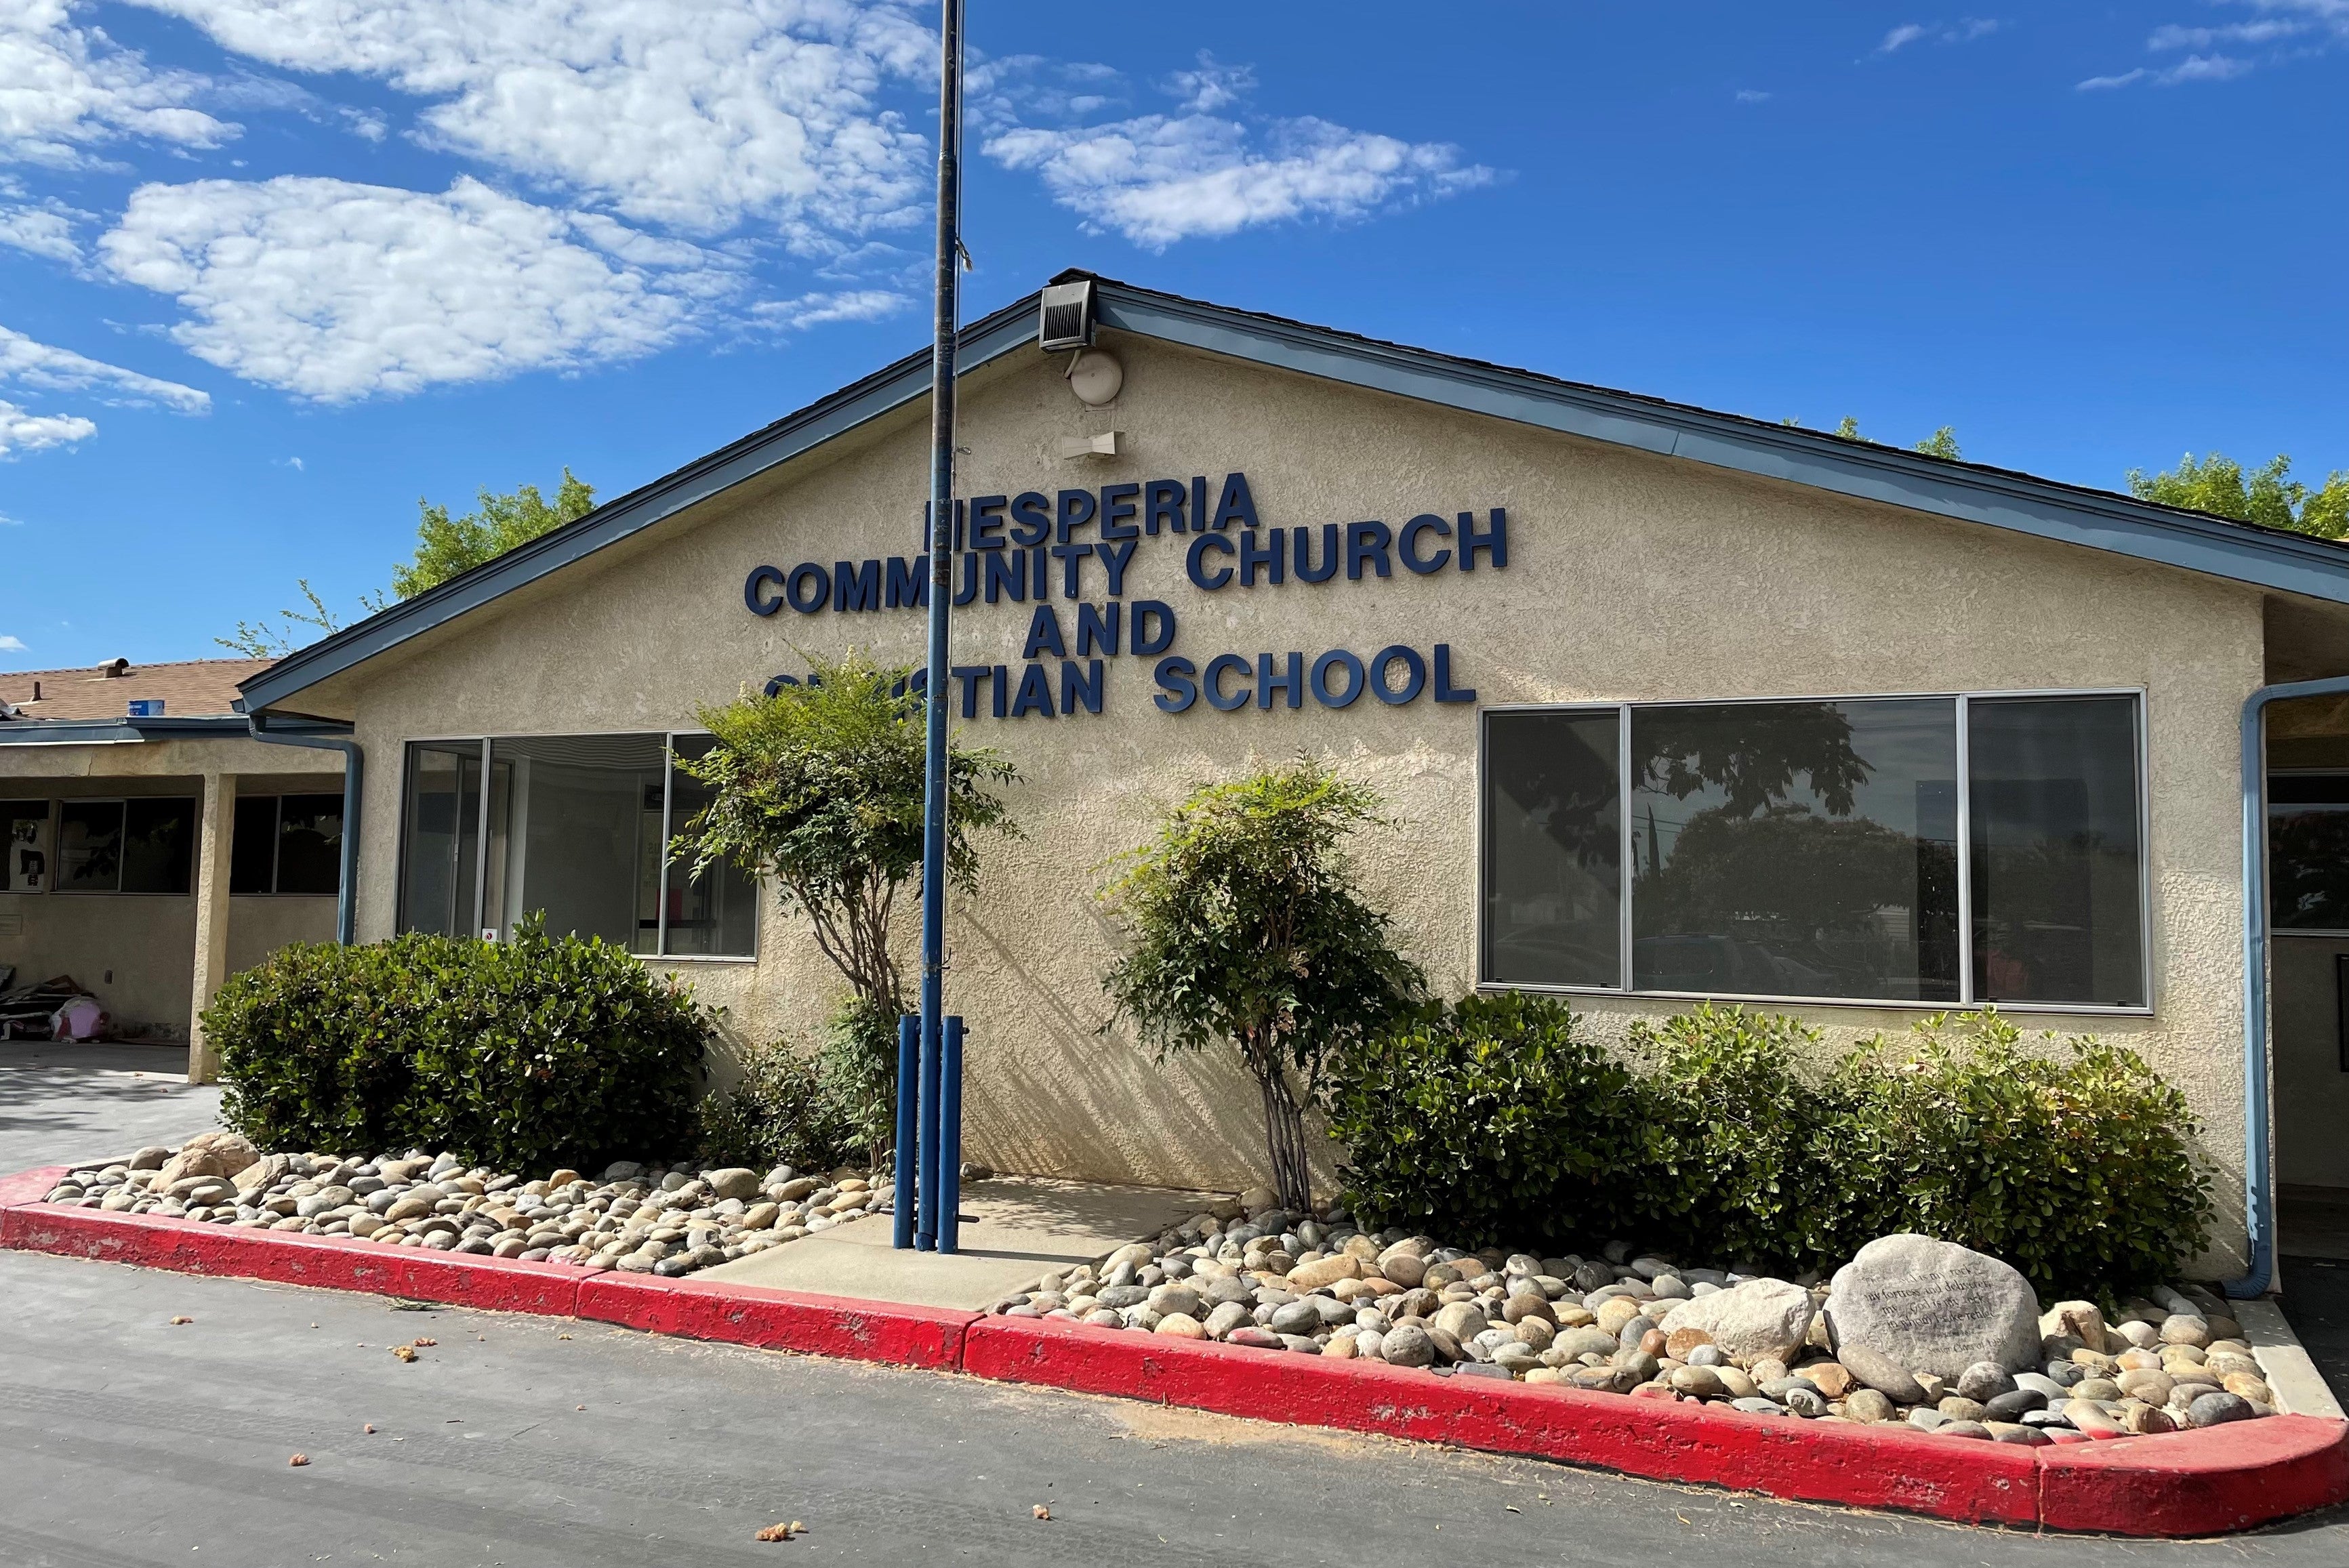 Growing Church and Education Center Effortlessly Doubled the Student Population on Their Network and Saved Thousands by Choosing Nuclias Cloud